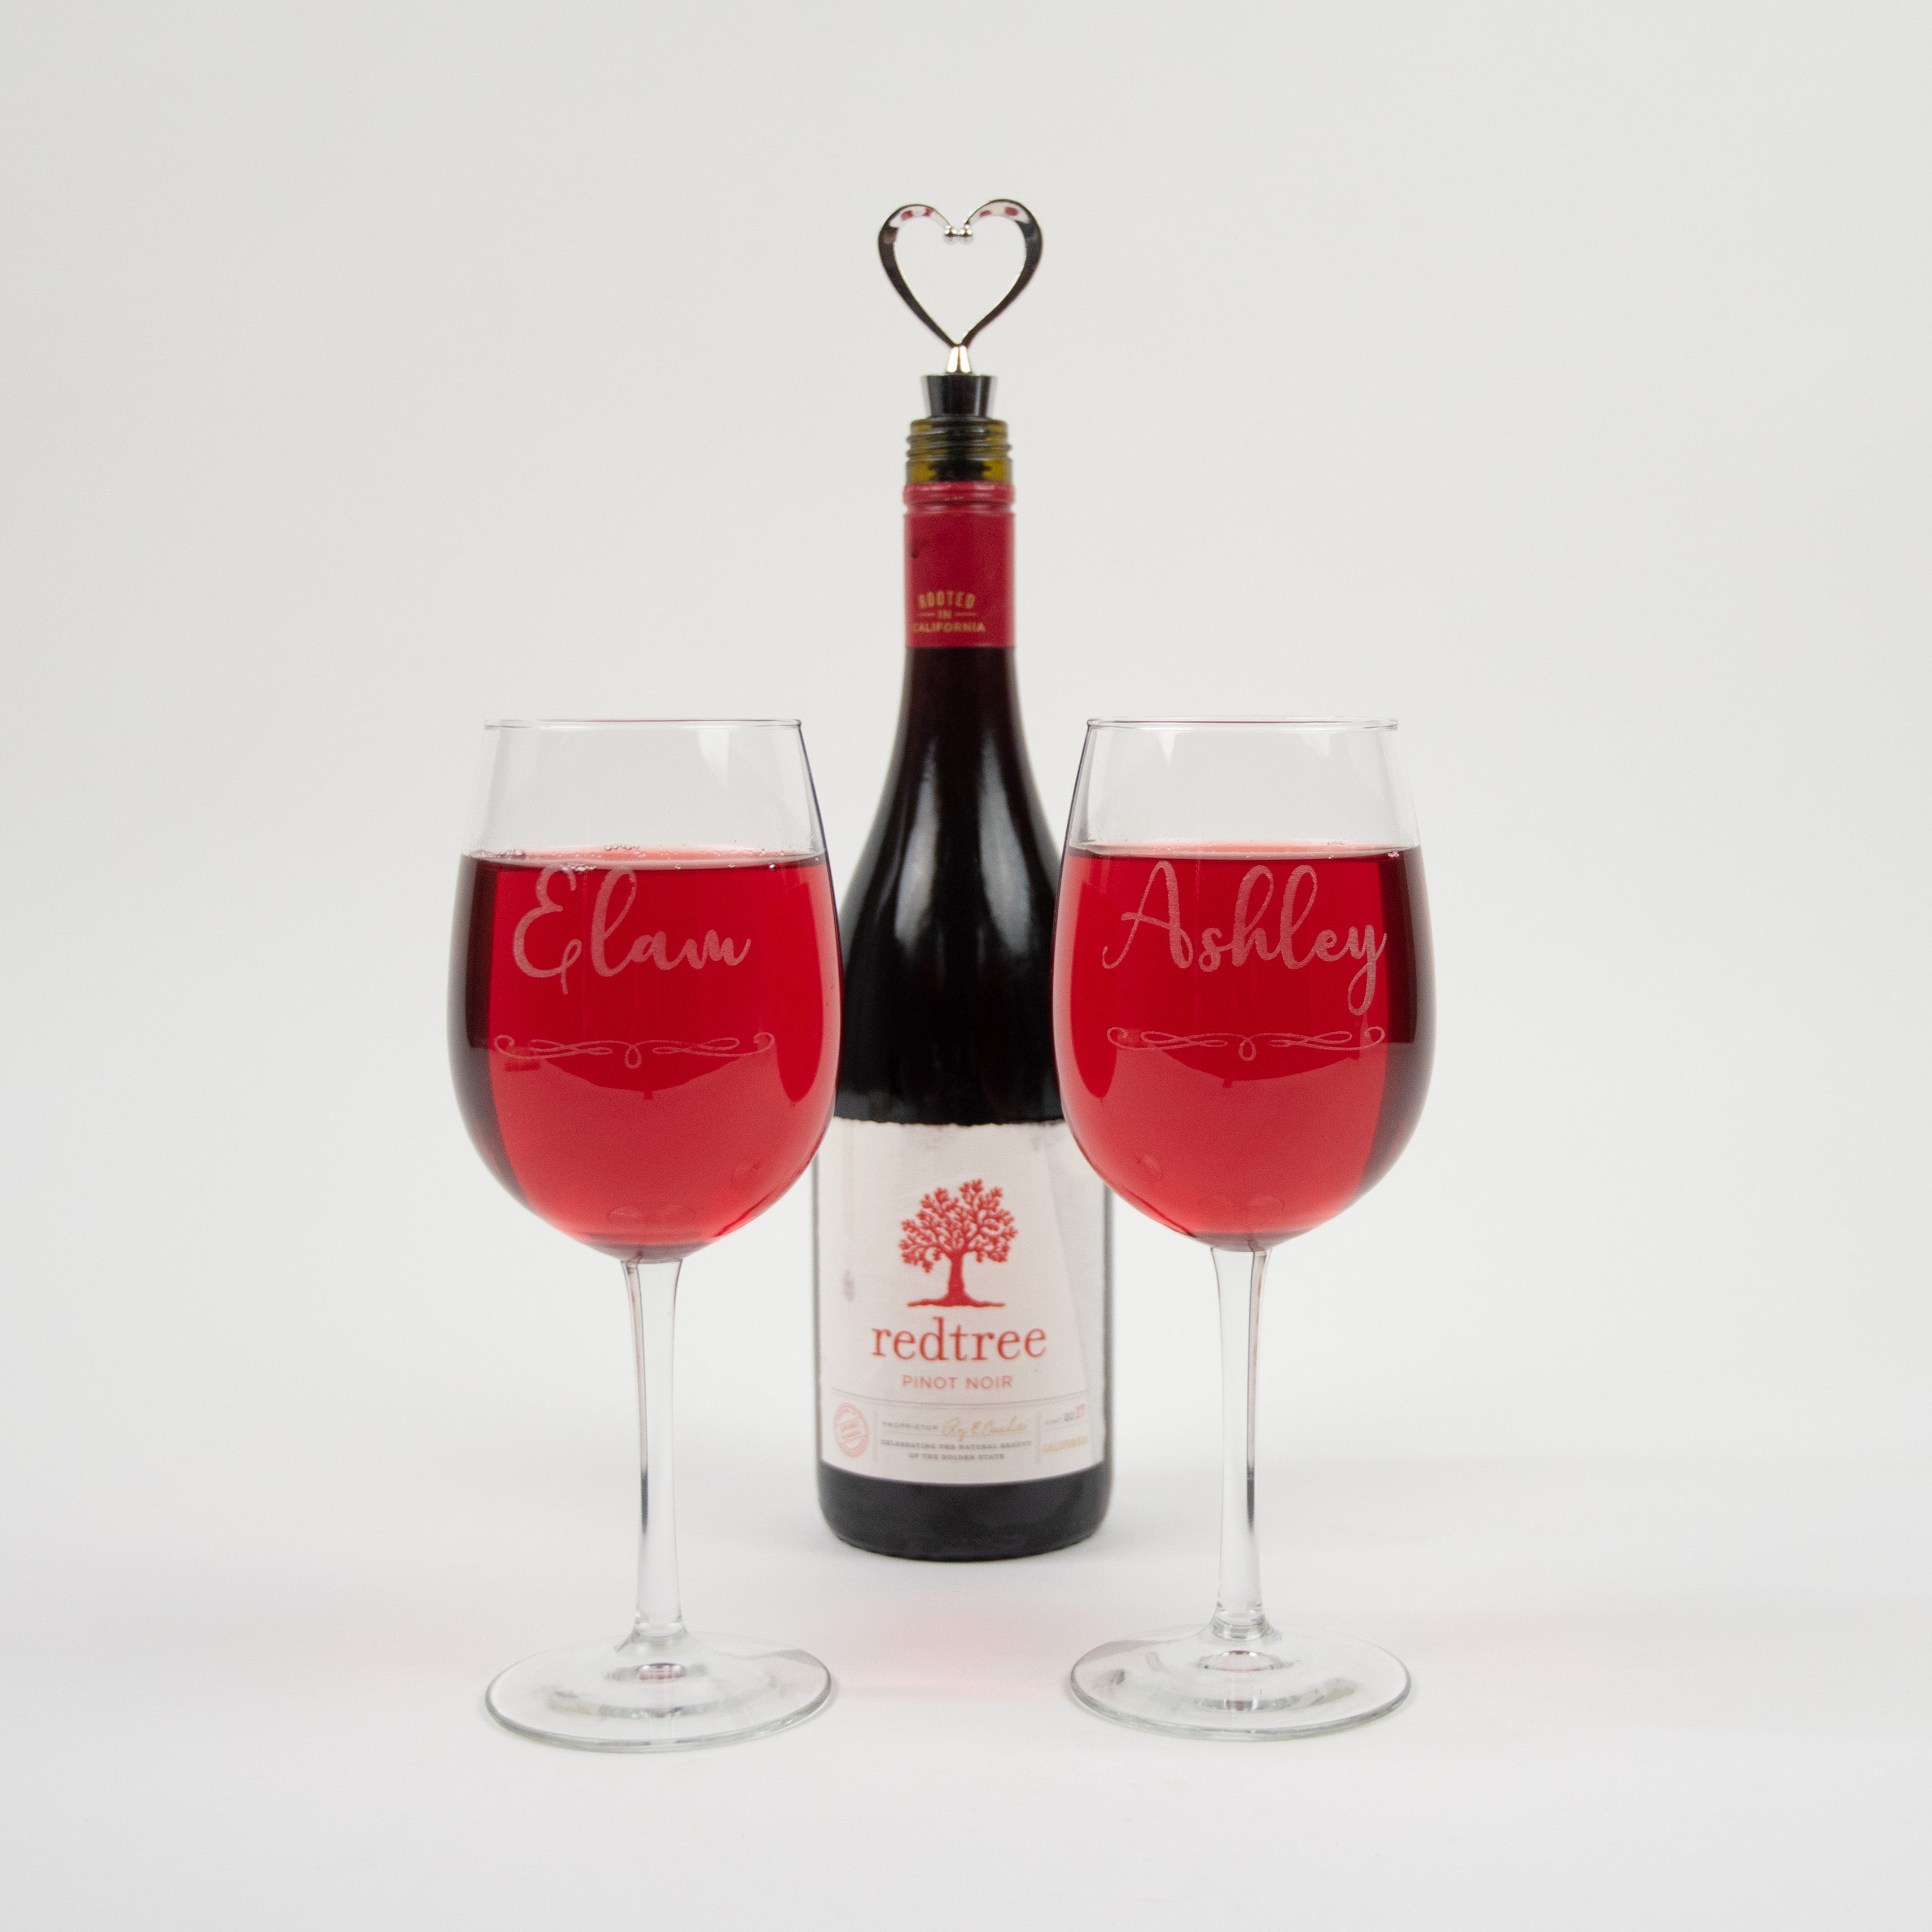 Soulmates Wine Glass Gift Personalized Glasses, True Soulmates